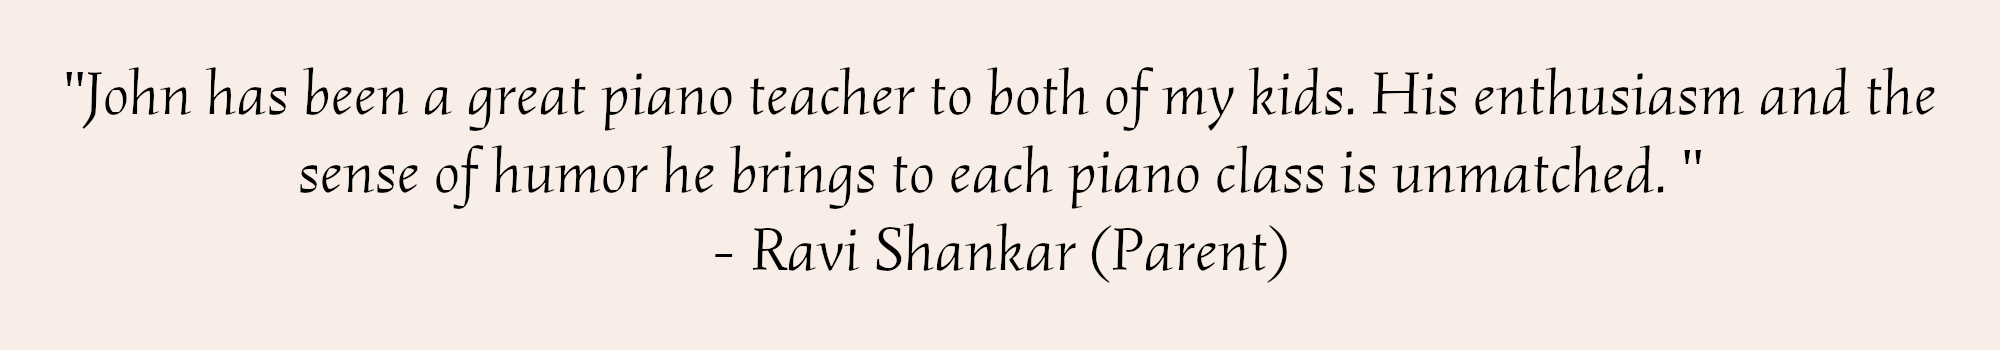 Shankar Quote.png